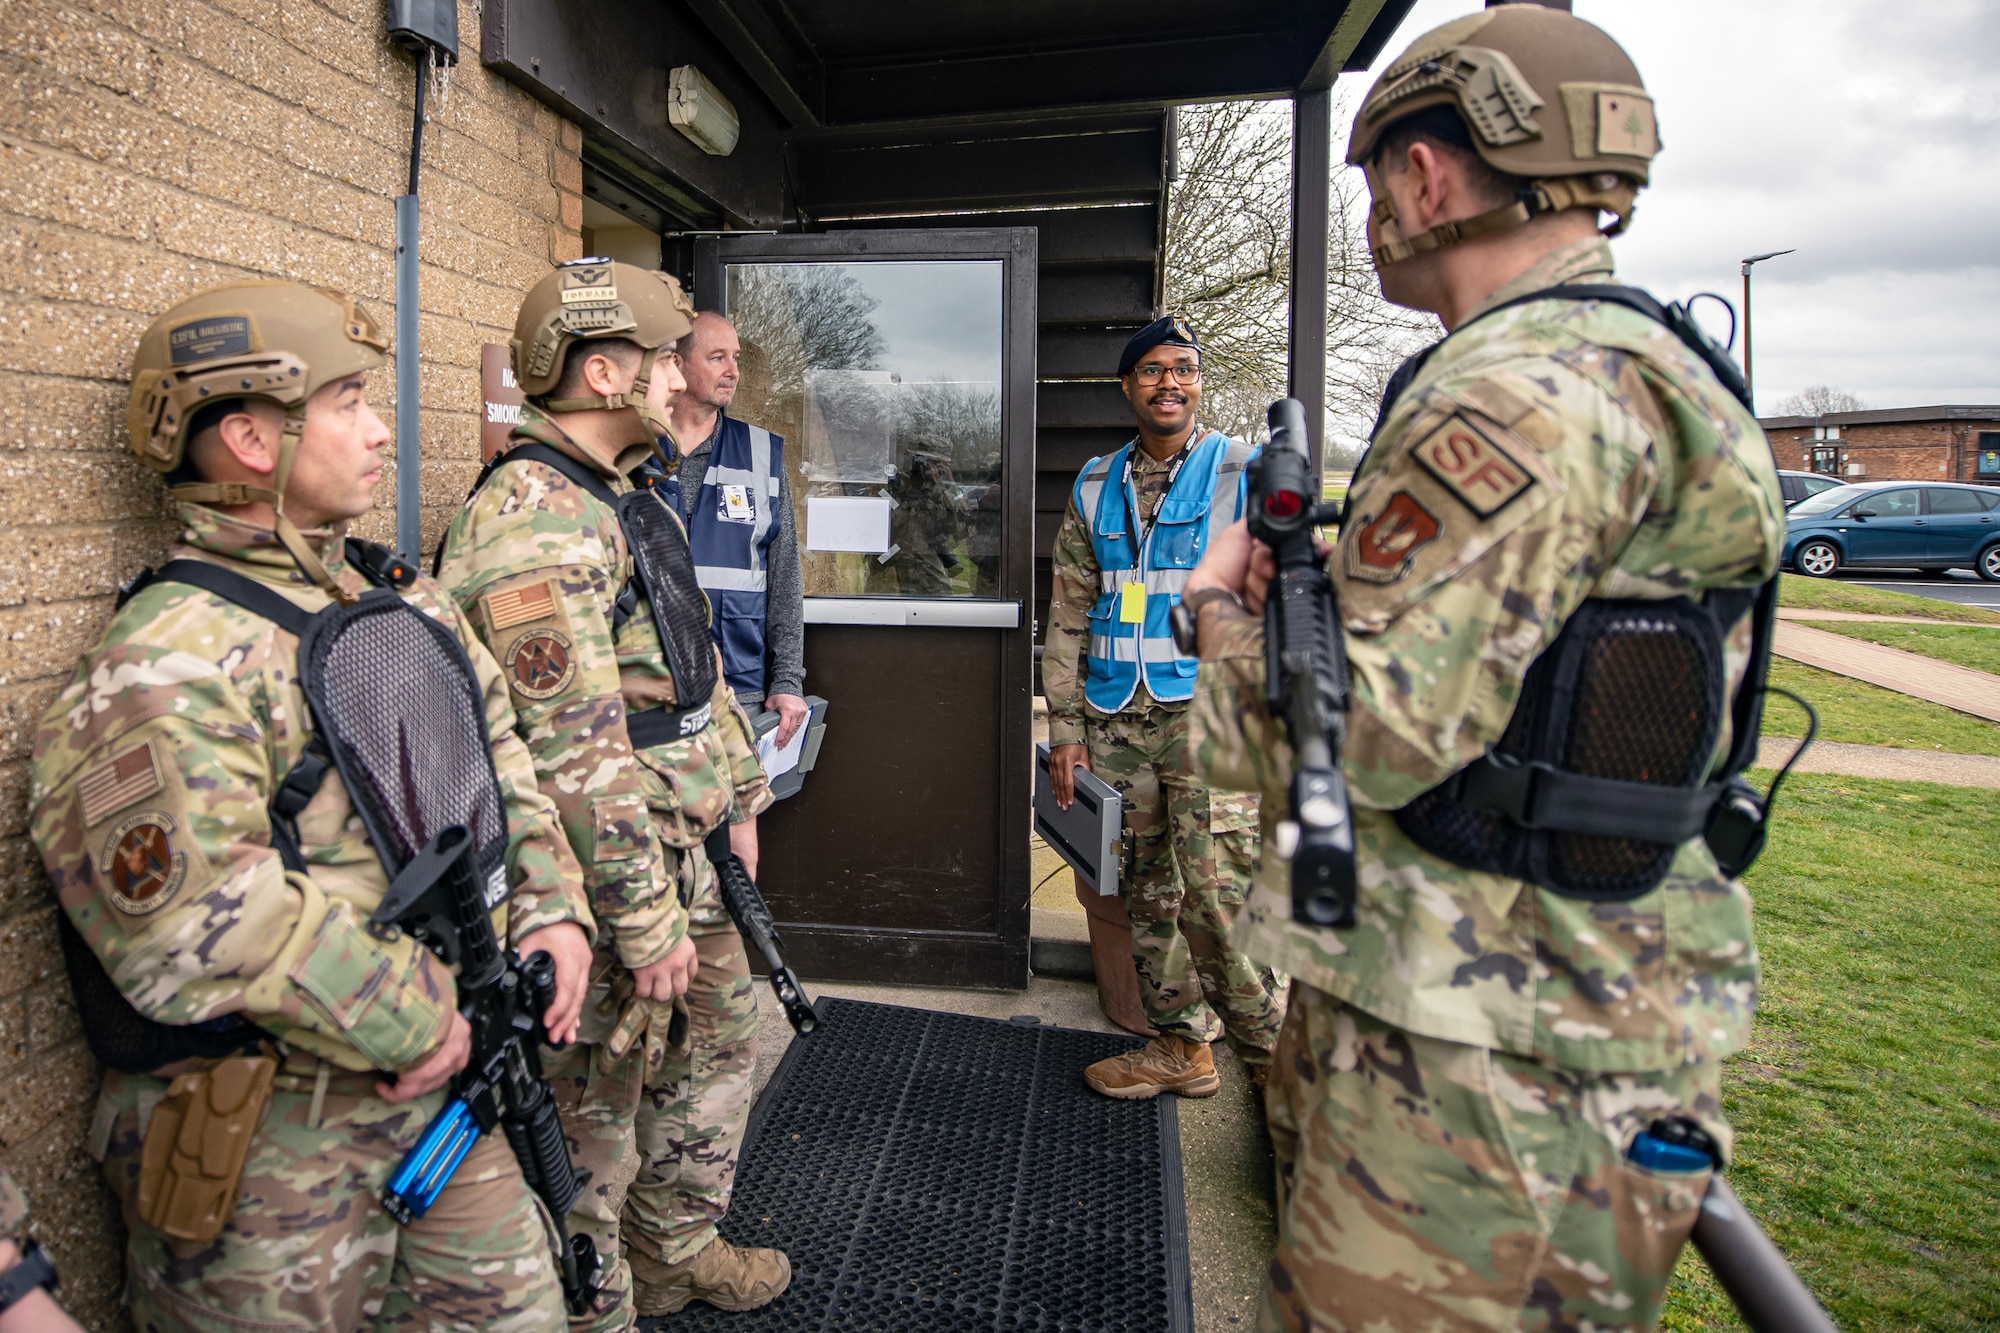 Airmen from the 423d Security Forces Squadron discuss their response following an active shooter exercise at RAF Alconbury, England, March 16, 2023. The exercise tested the 501st Combat Support Wing on overall readiness and ability to respond to an emergency situation. (U.S. Air Force photo by Staff Sgt. Eugene Oliver)